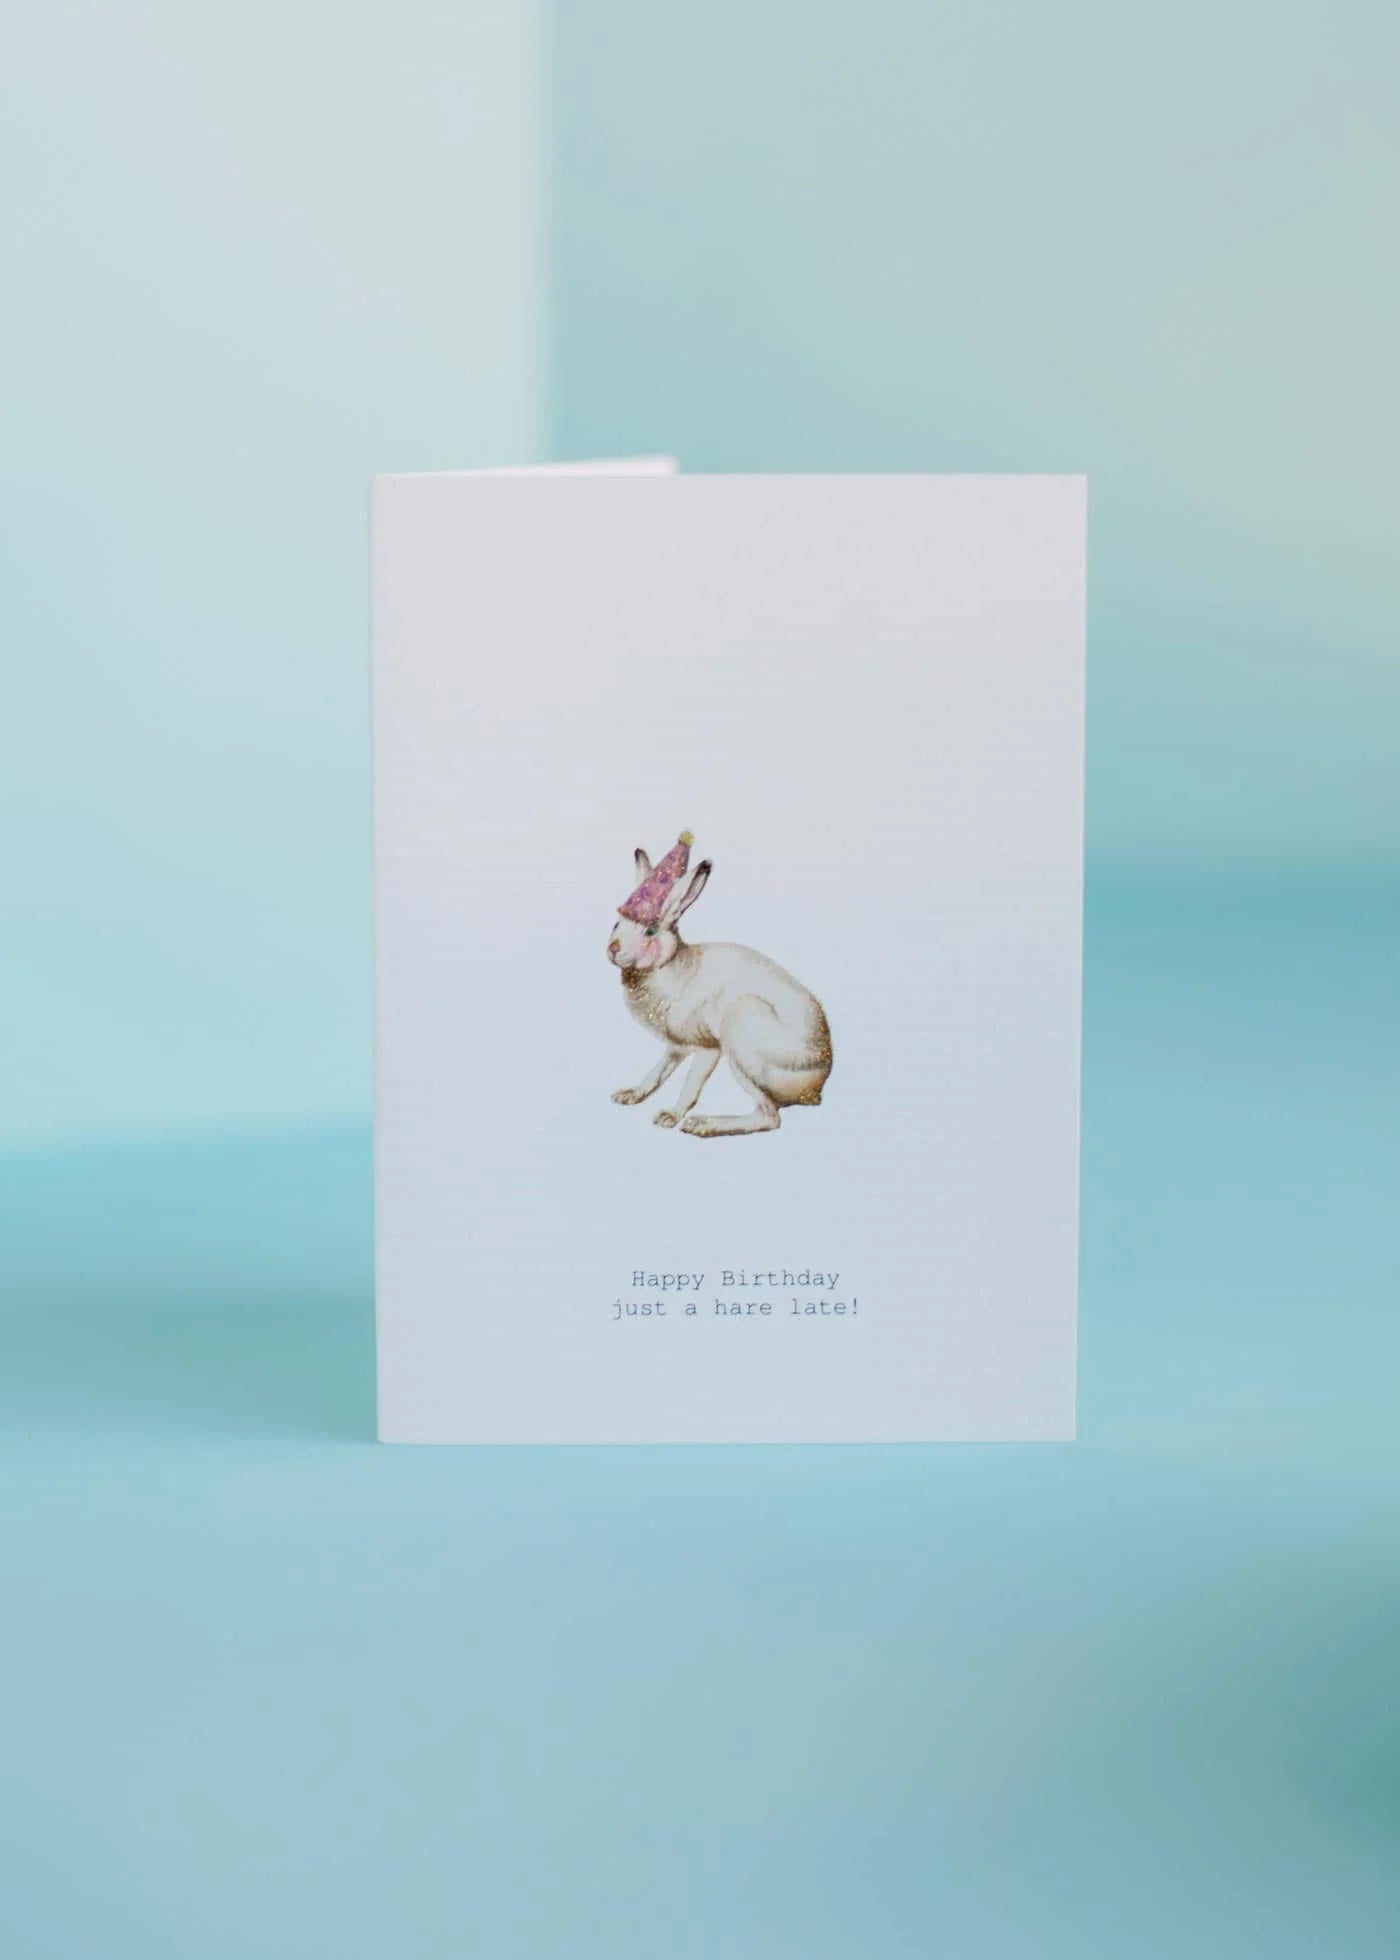 BIRTHDAY GREETING CARD "A HARE LATE"